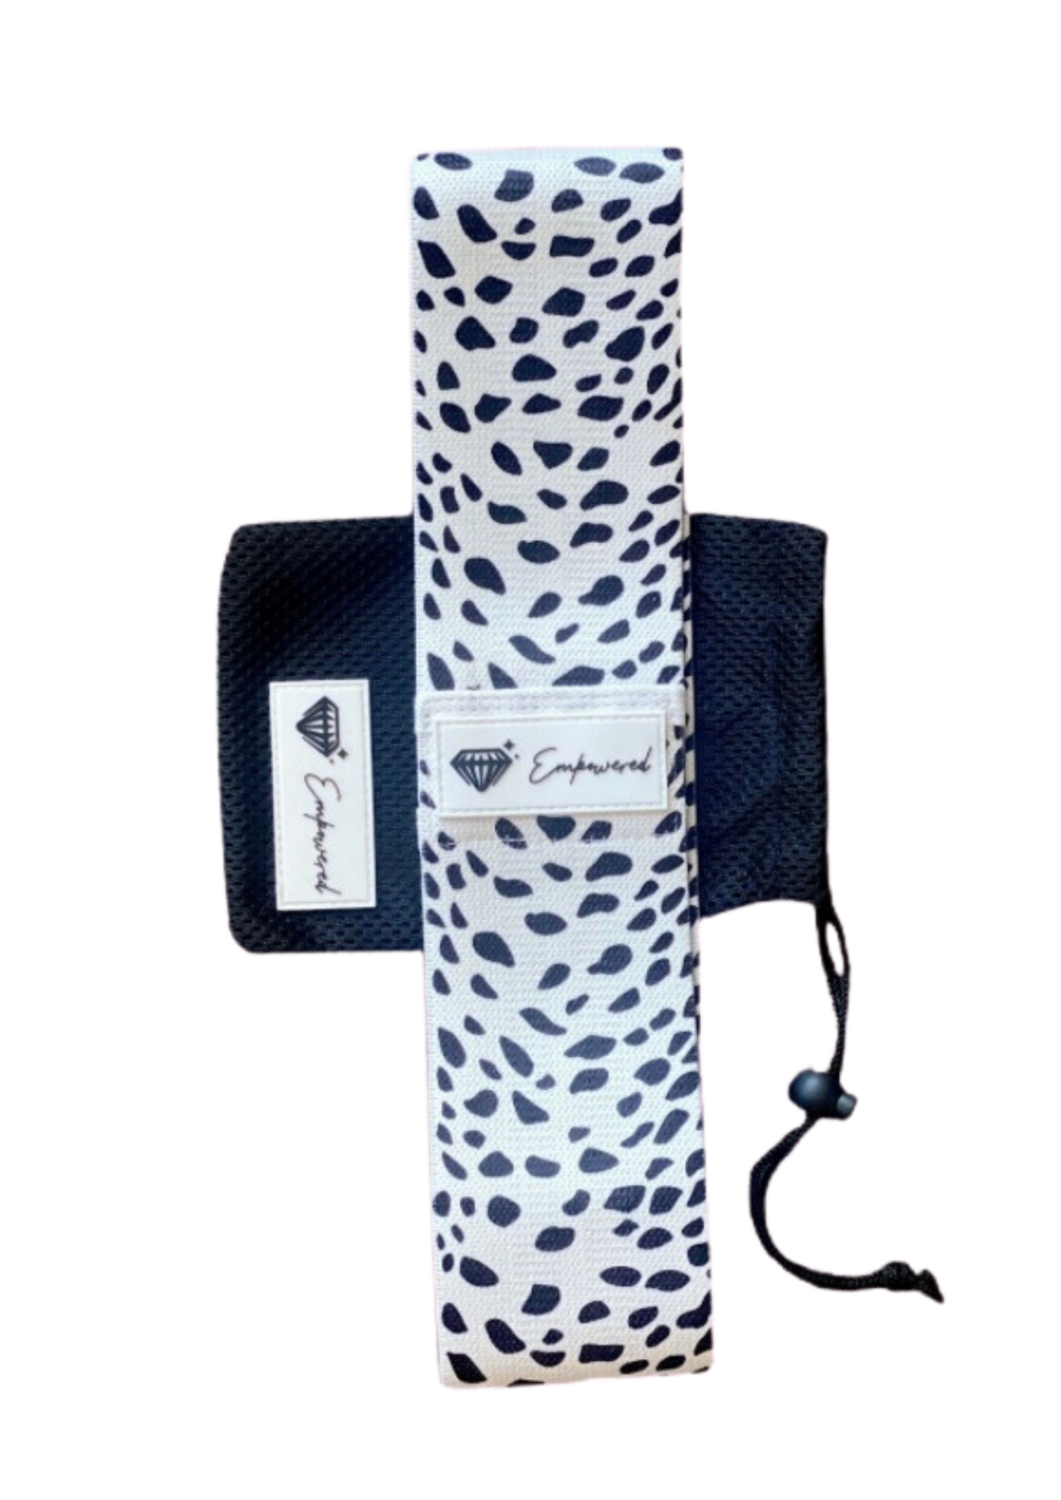 Snow Leopard Med-Heavy Resistance Booty Band